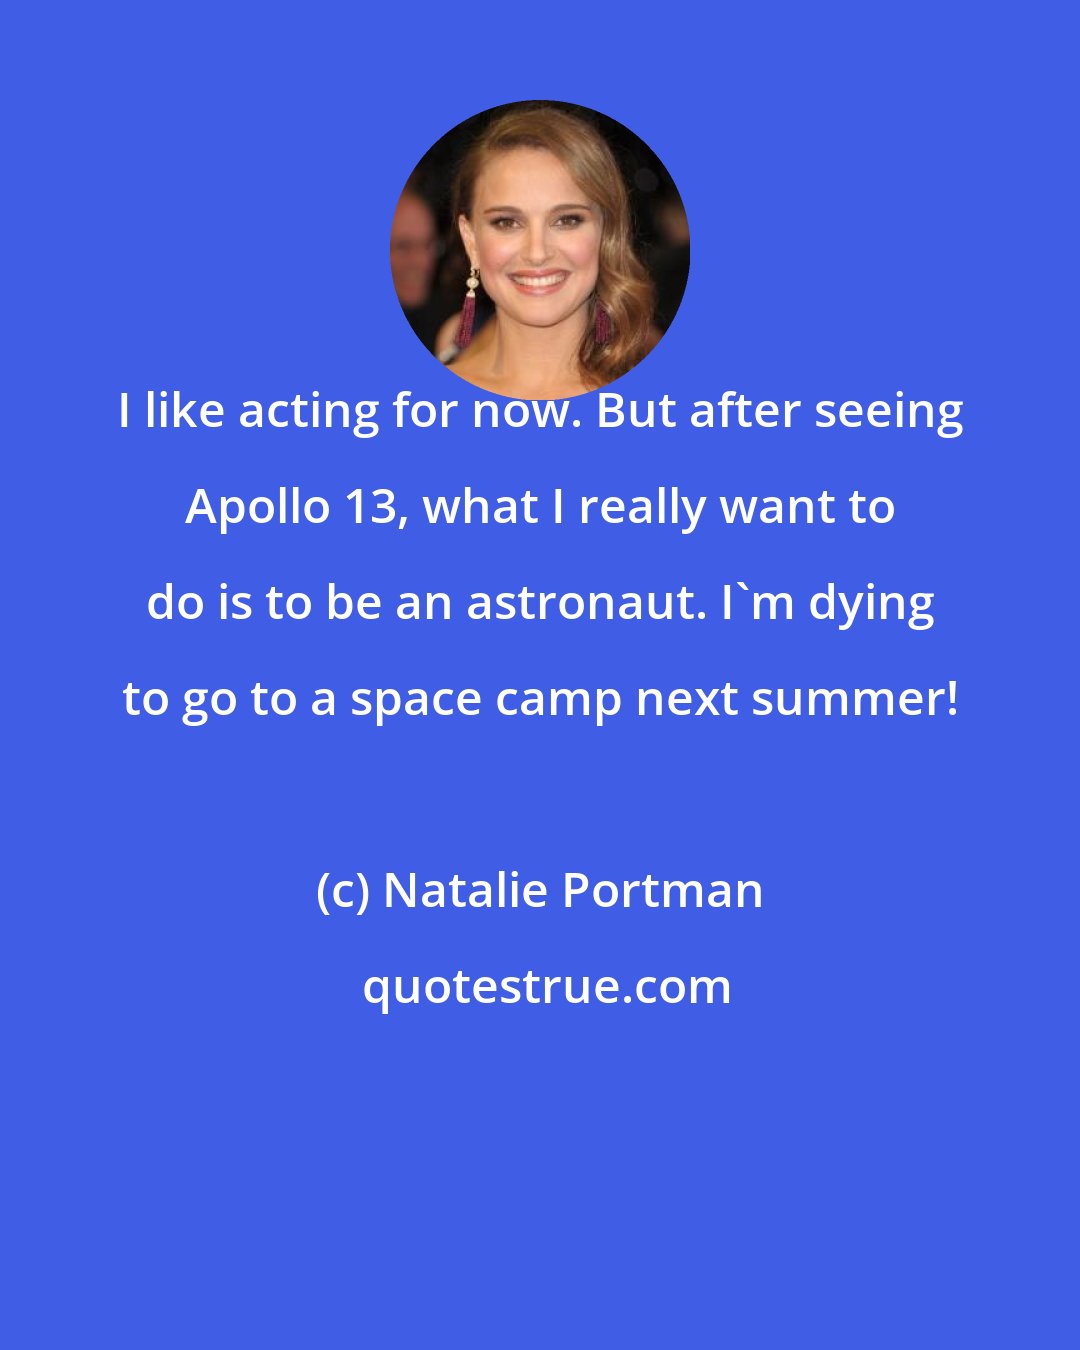 Natalie Portman: I like acting for now. But after seeing Apollo 13, what I really want to do is to be an astronaut. I'm dying to go to a space camp next summer!